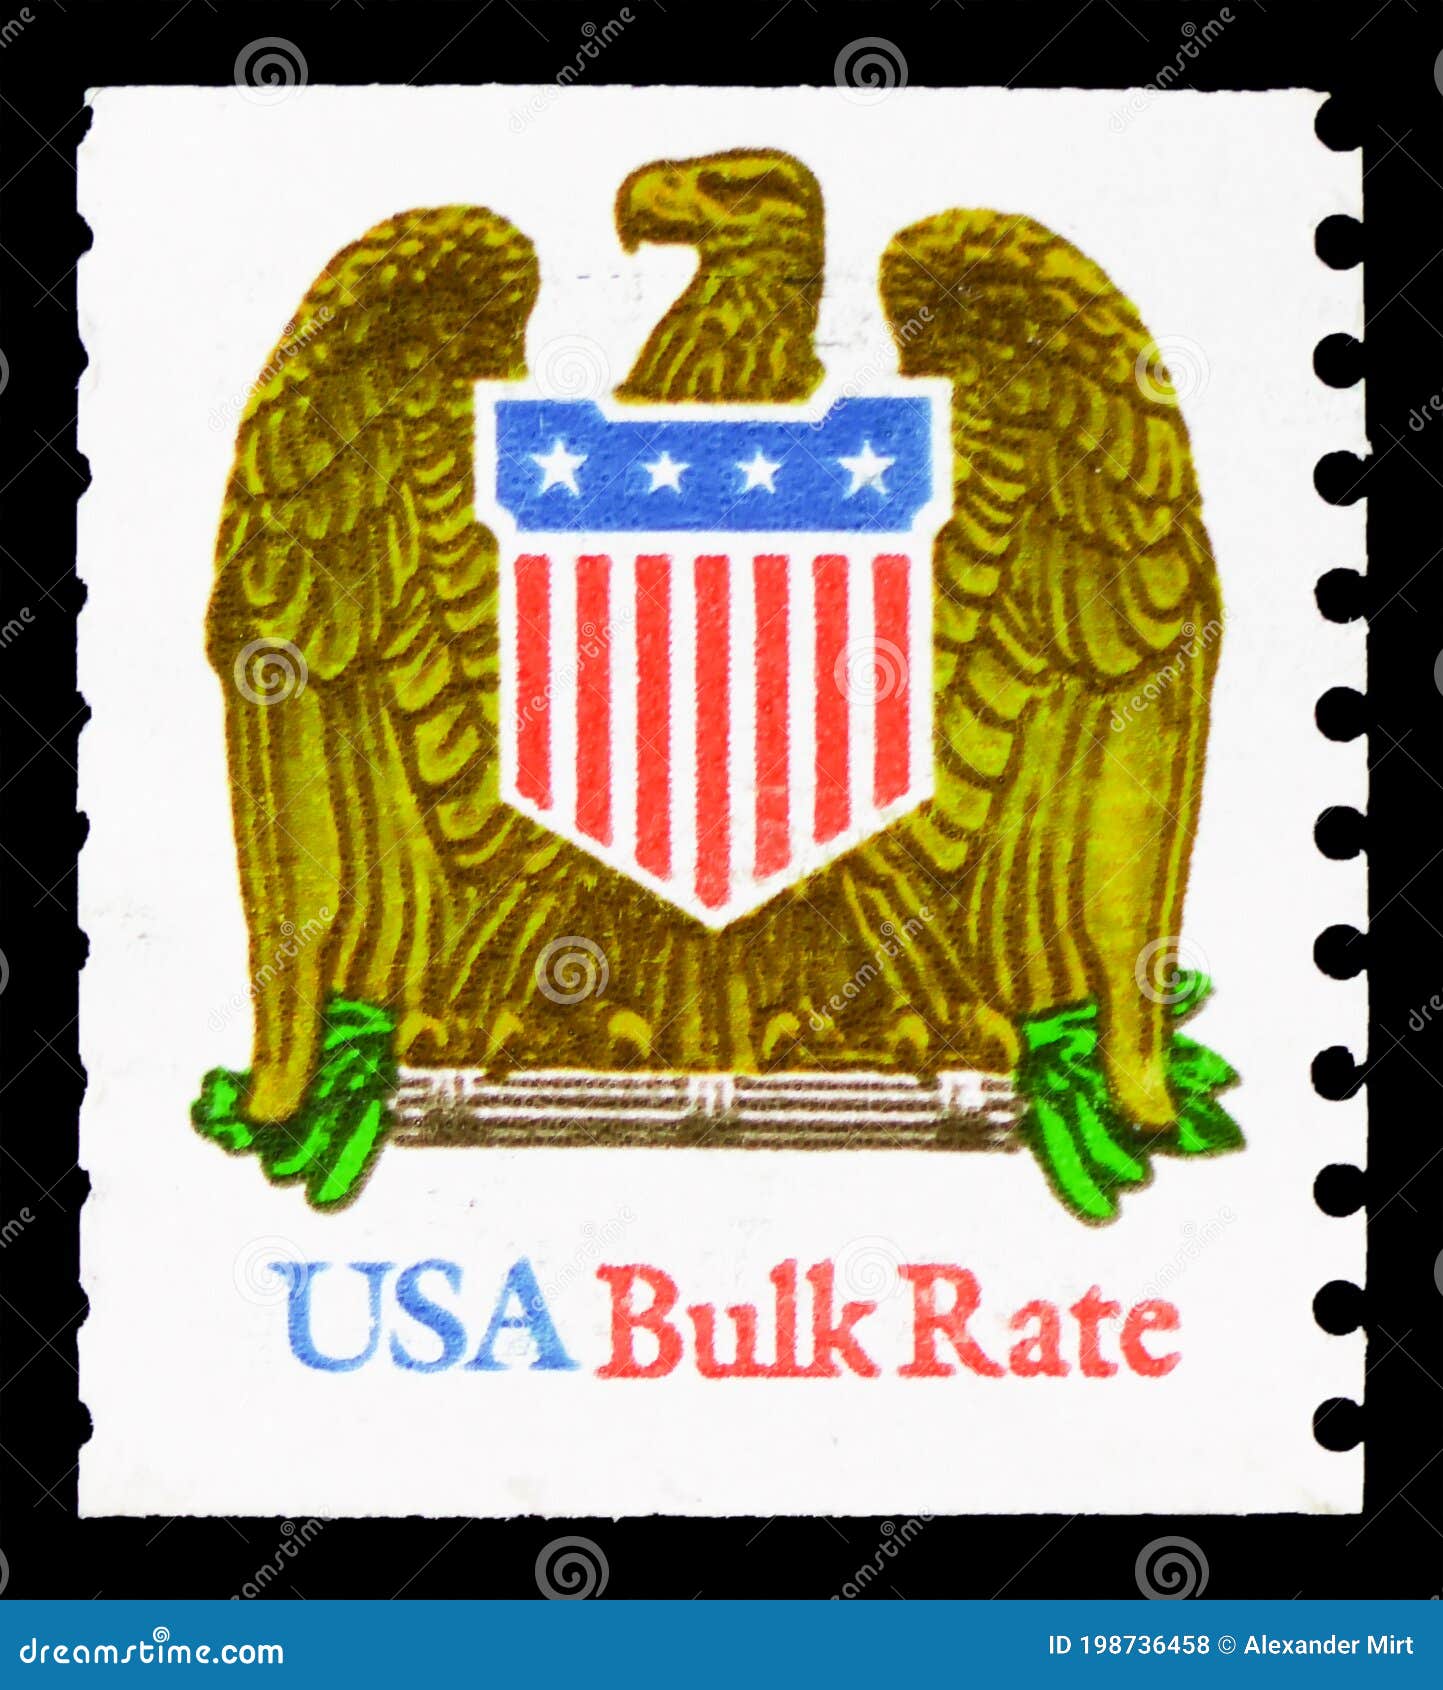 moscow-russia-september-postage-stamp-printed-united-states-shows-eagle-shield-gold-regular-issue-serie-circa-postage-stamp-198736458.jpg